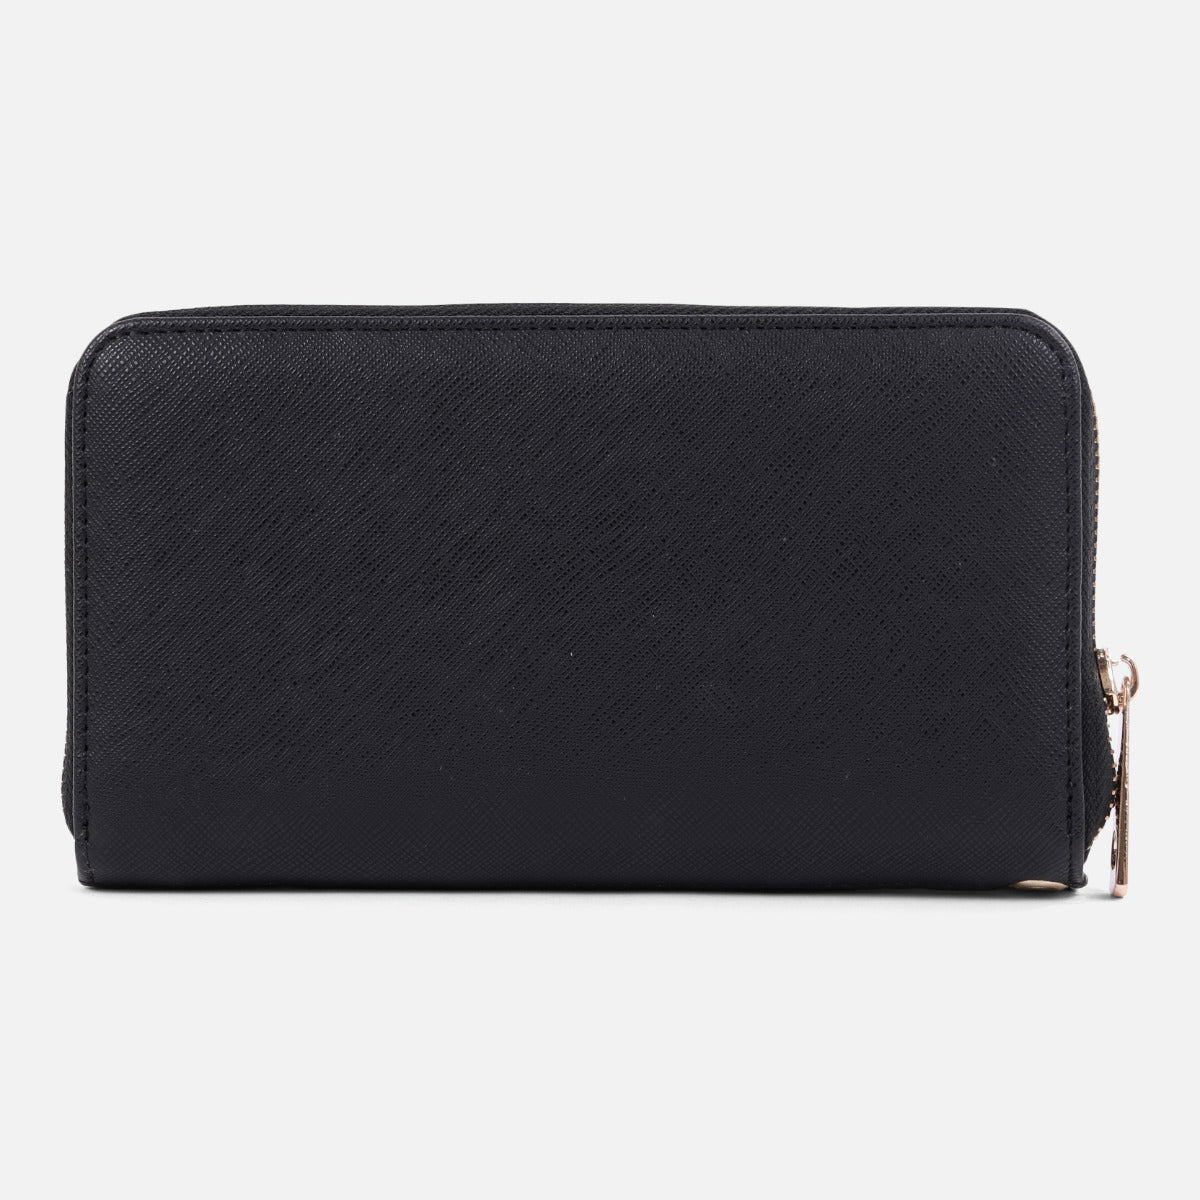 Beige and black wallet with front pocket